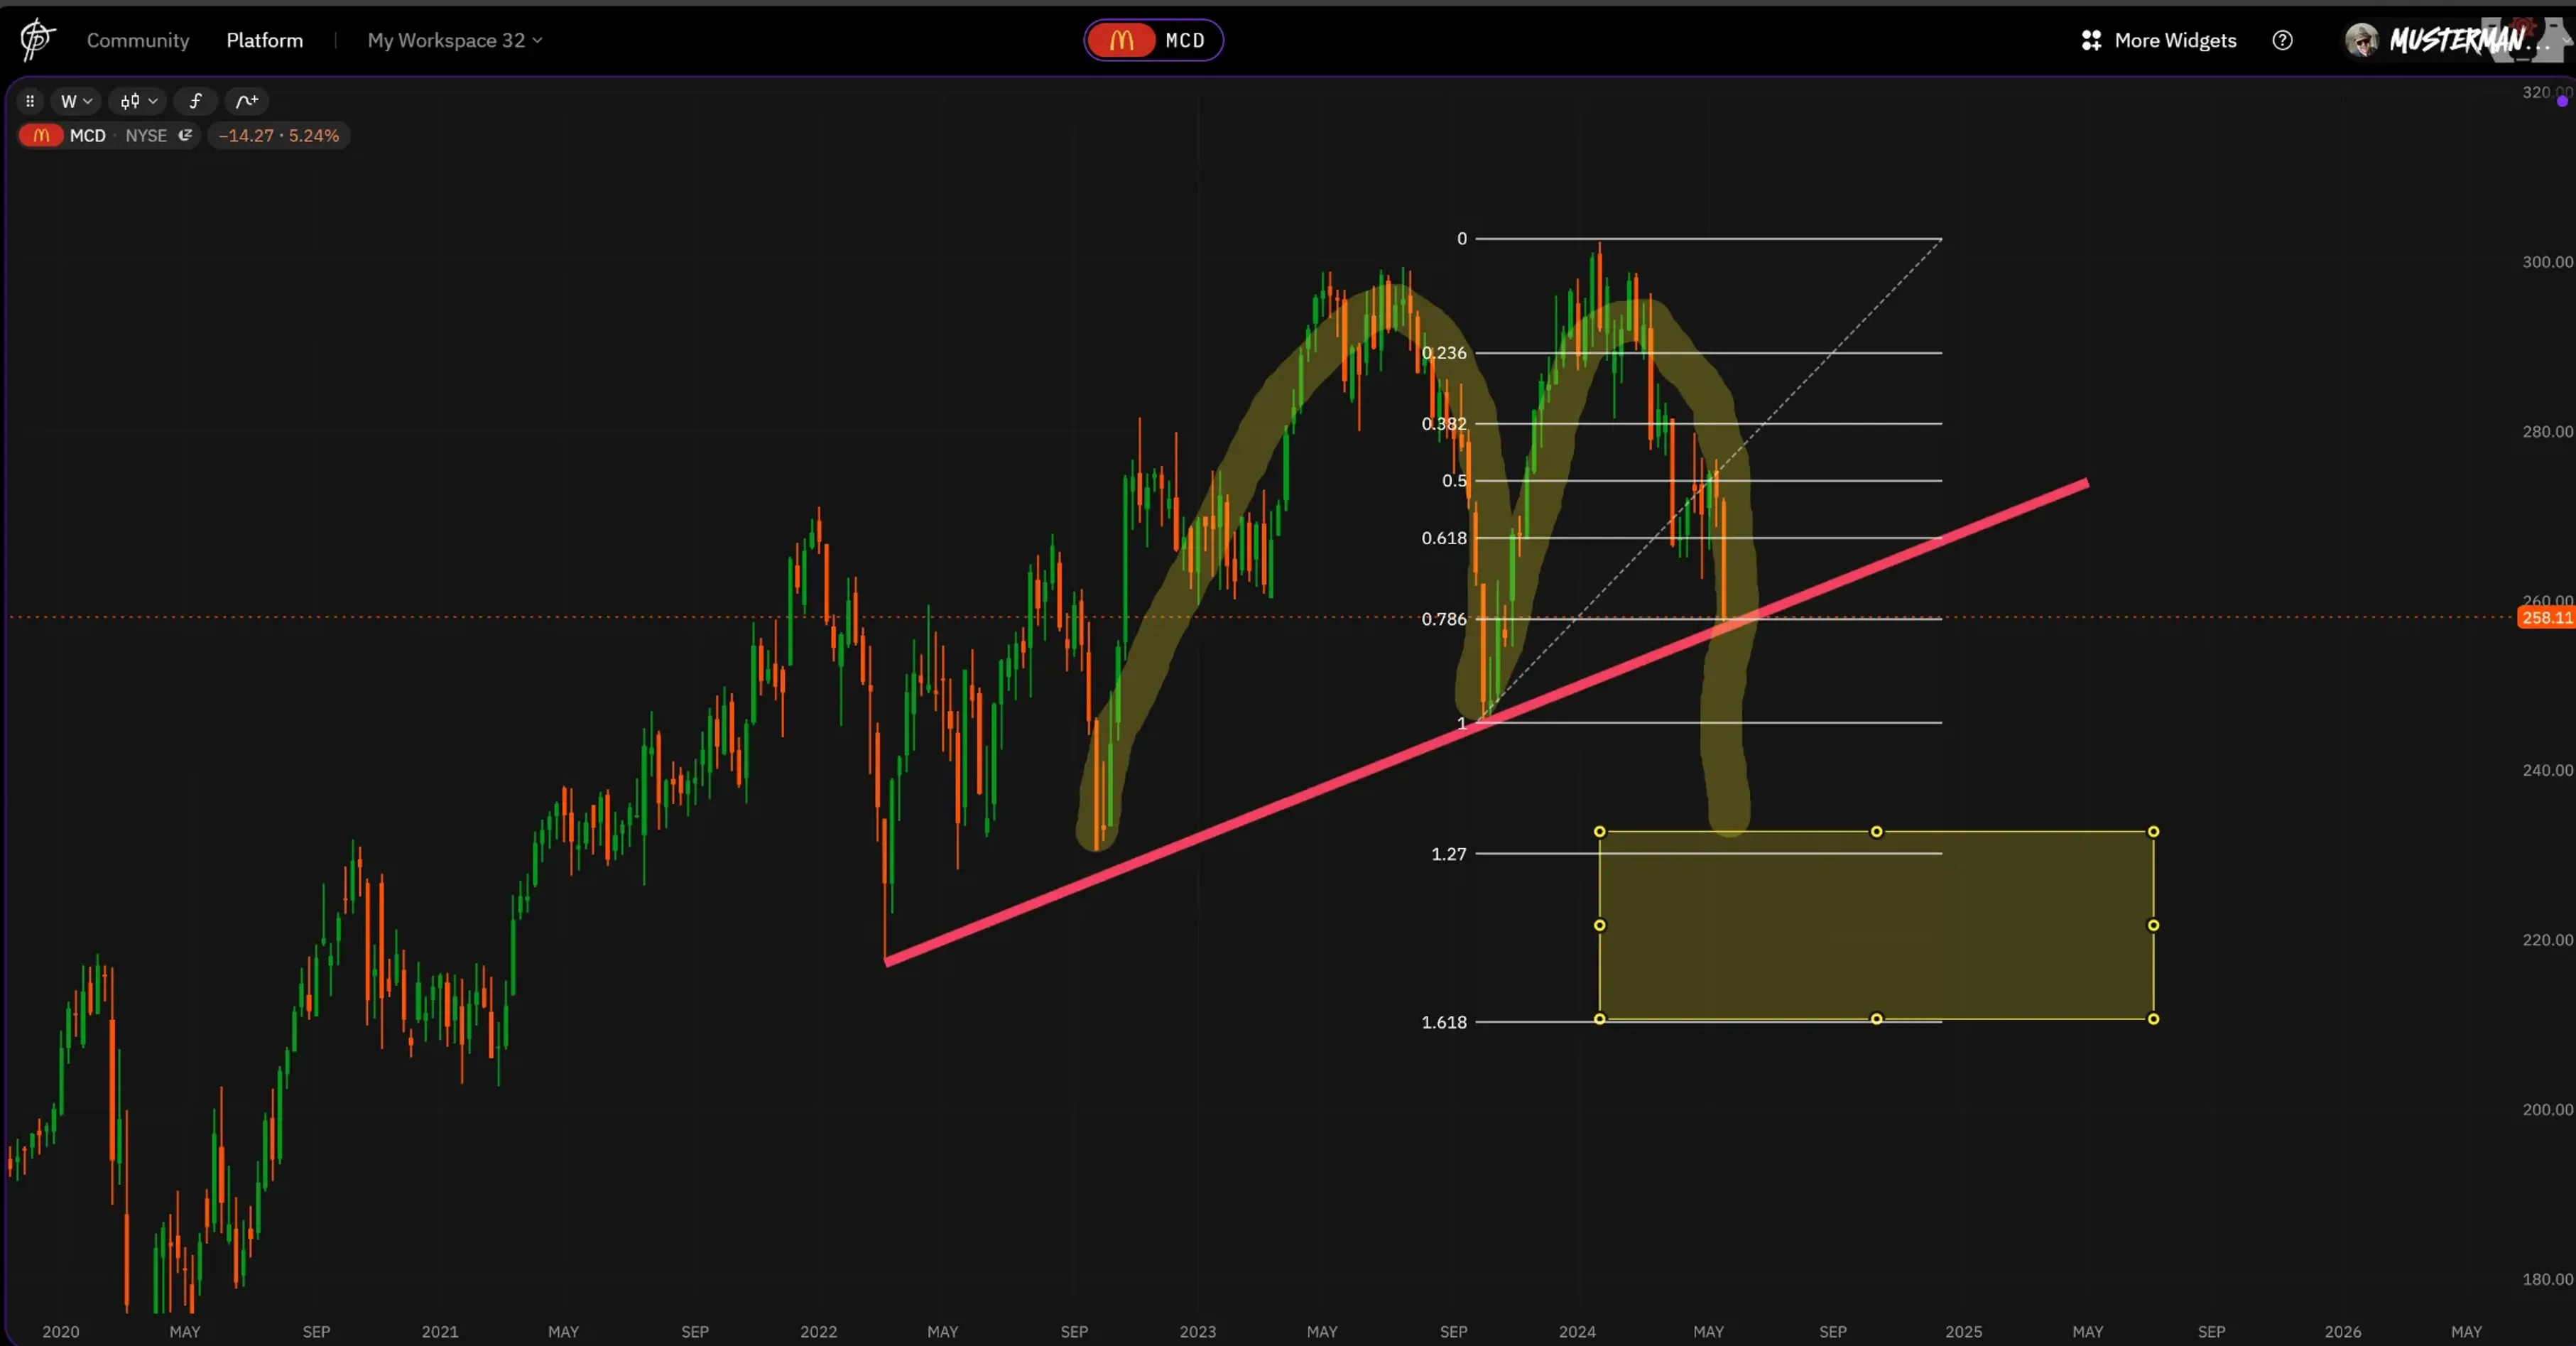 Option of a breakout into the yellow box if the trend line is broken